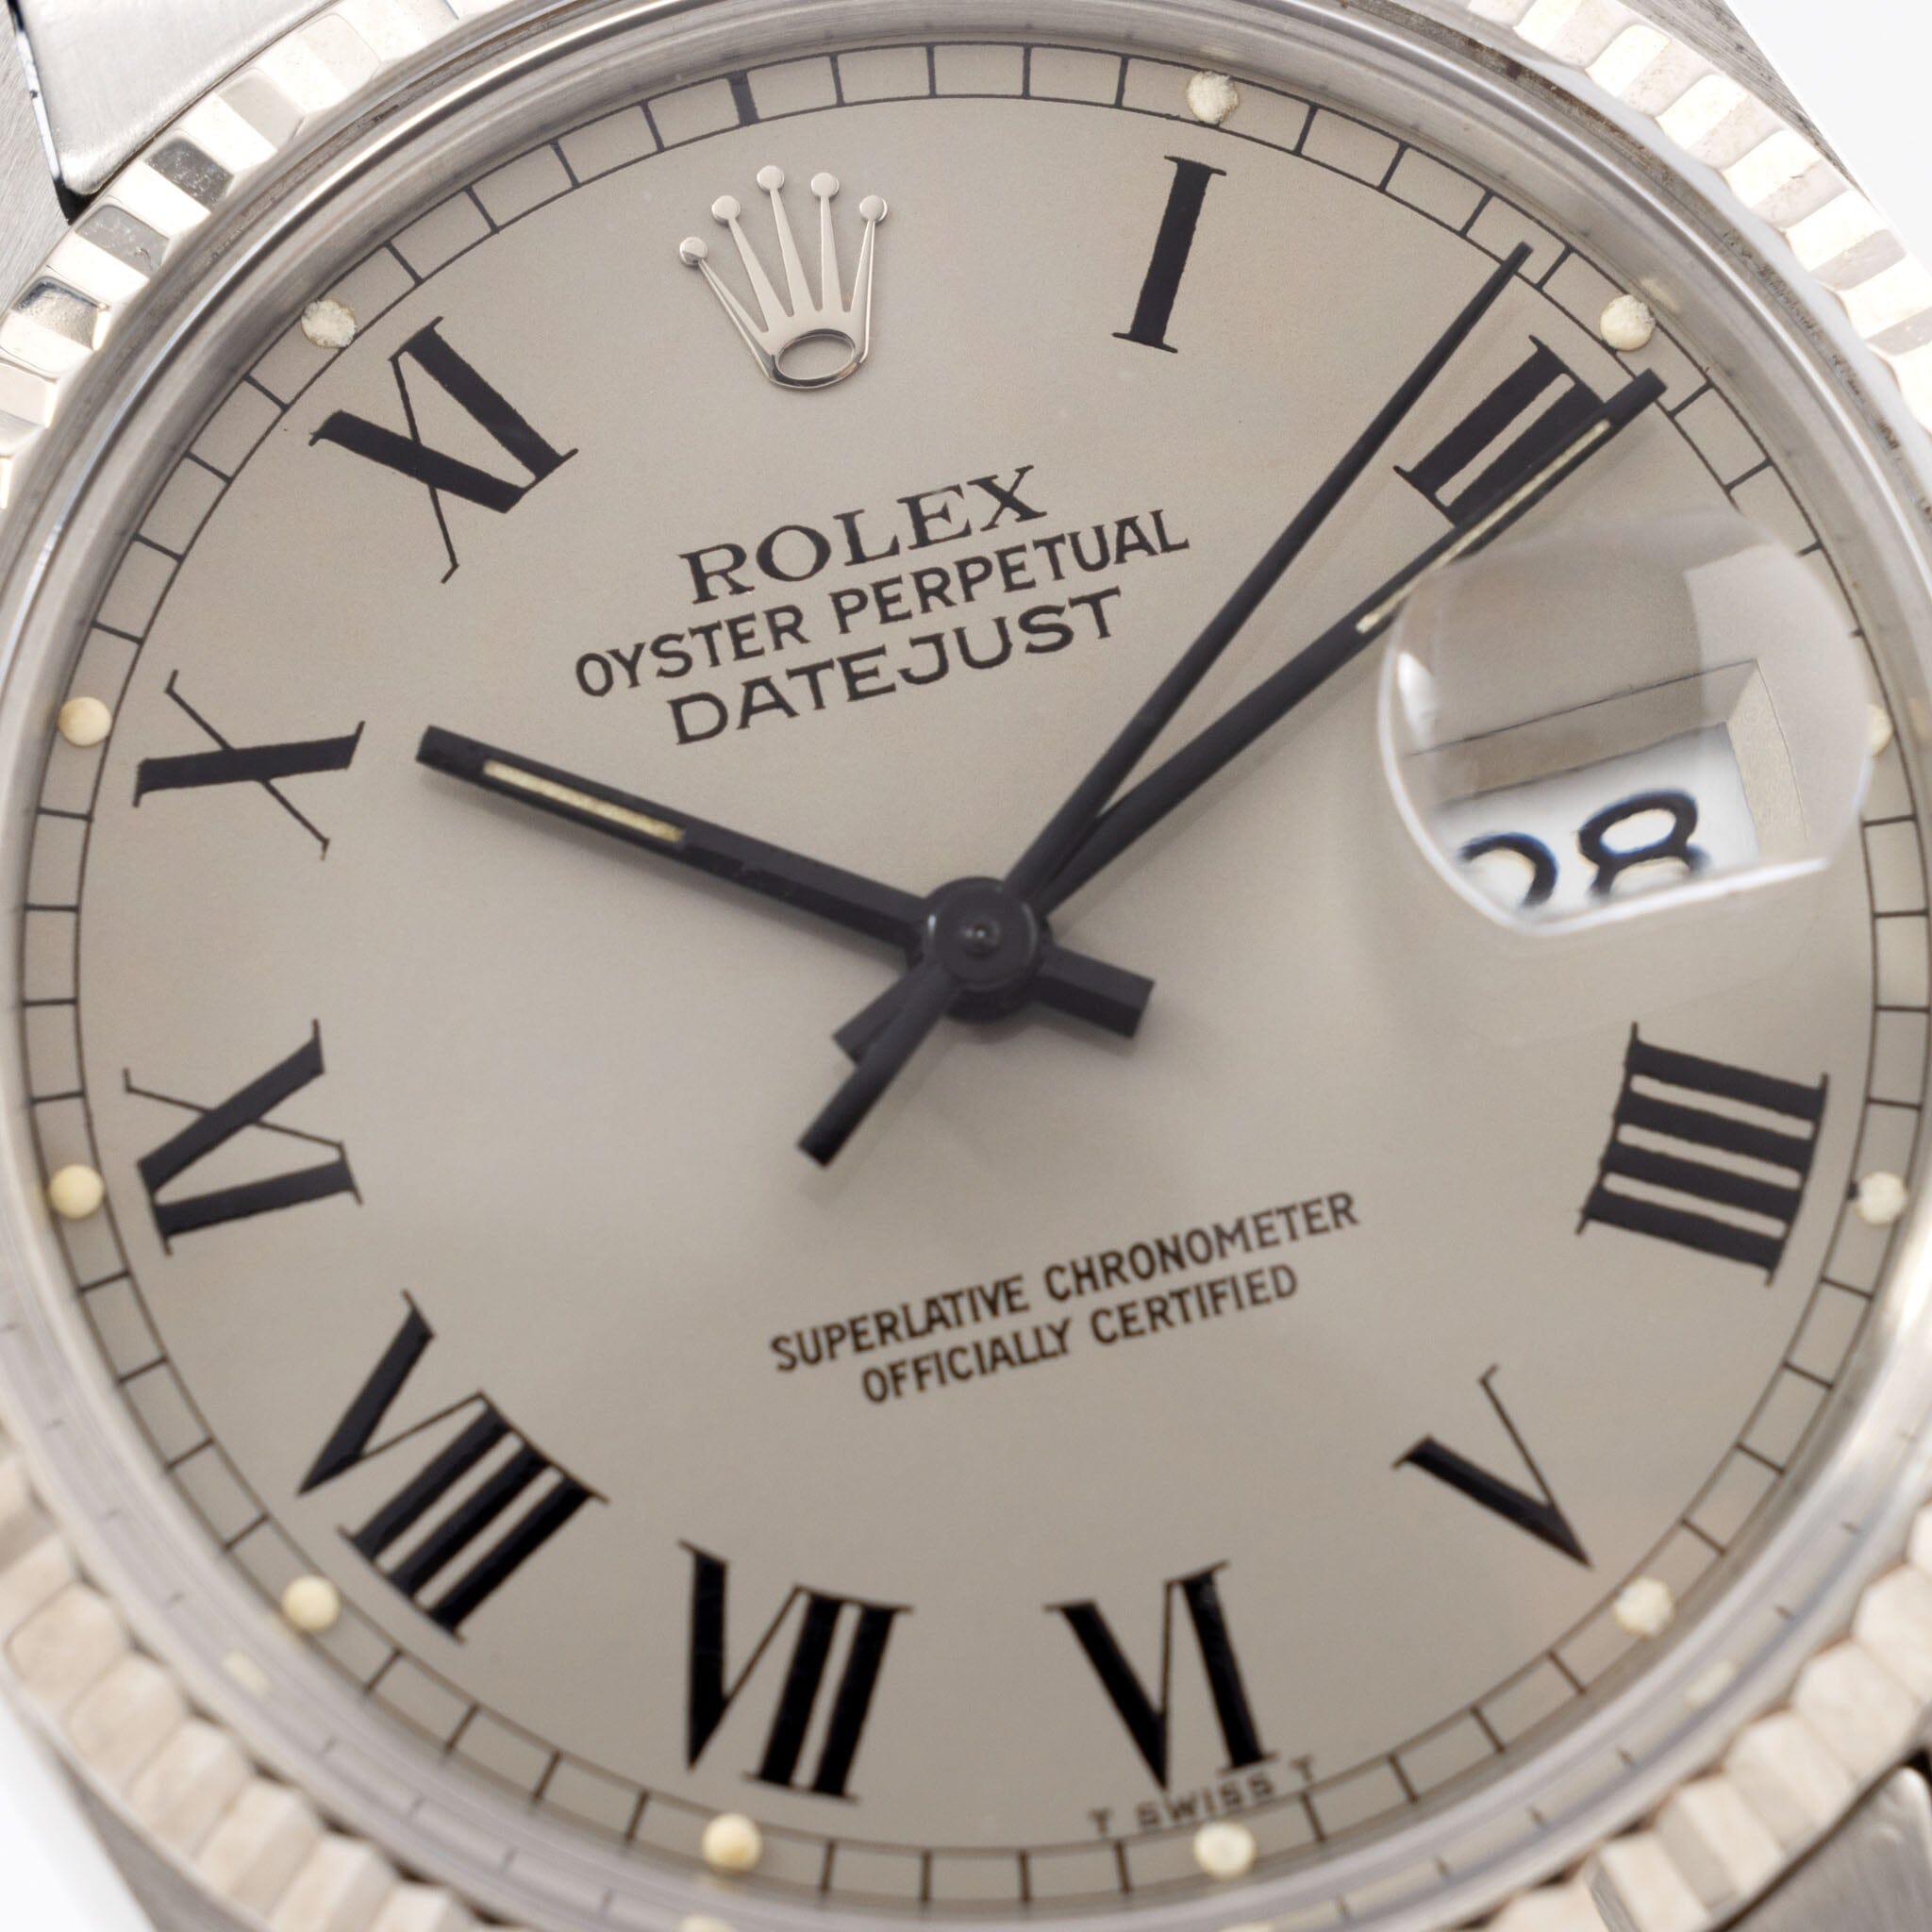 Rolex Datejust Reference 16014 rare Grey Buckley Dial